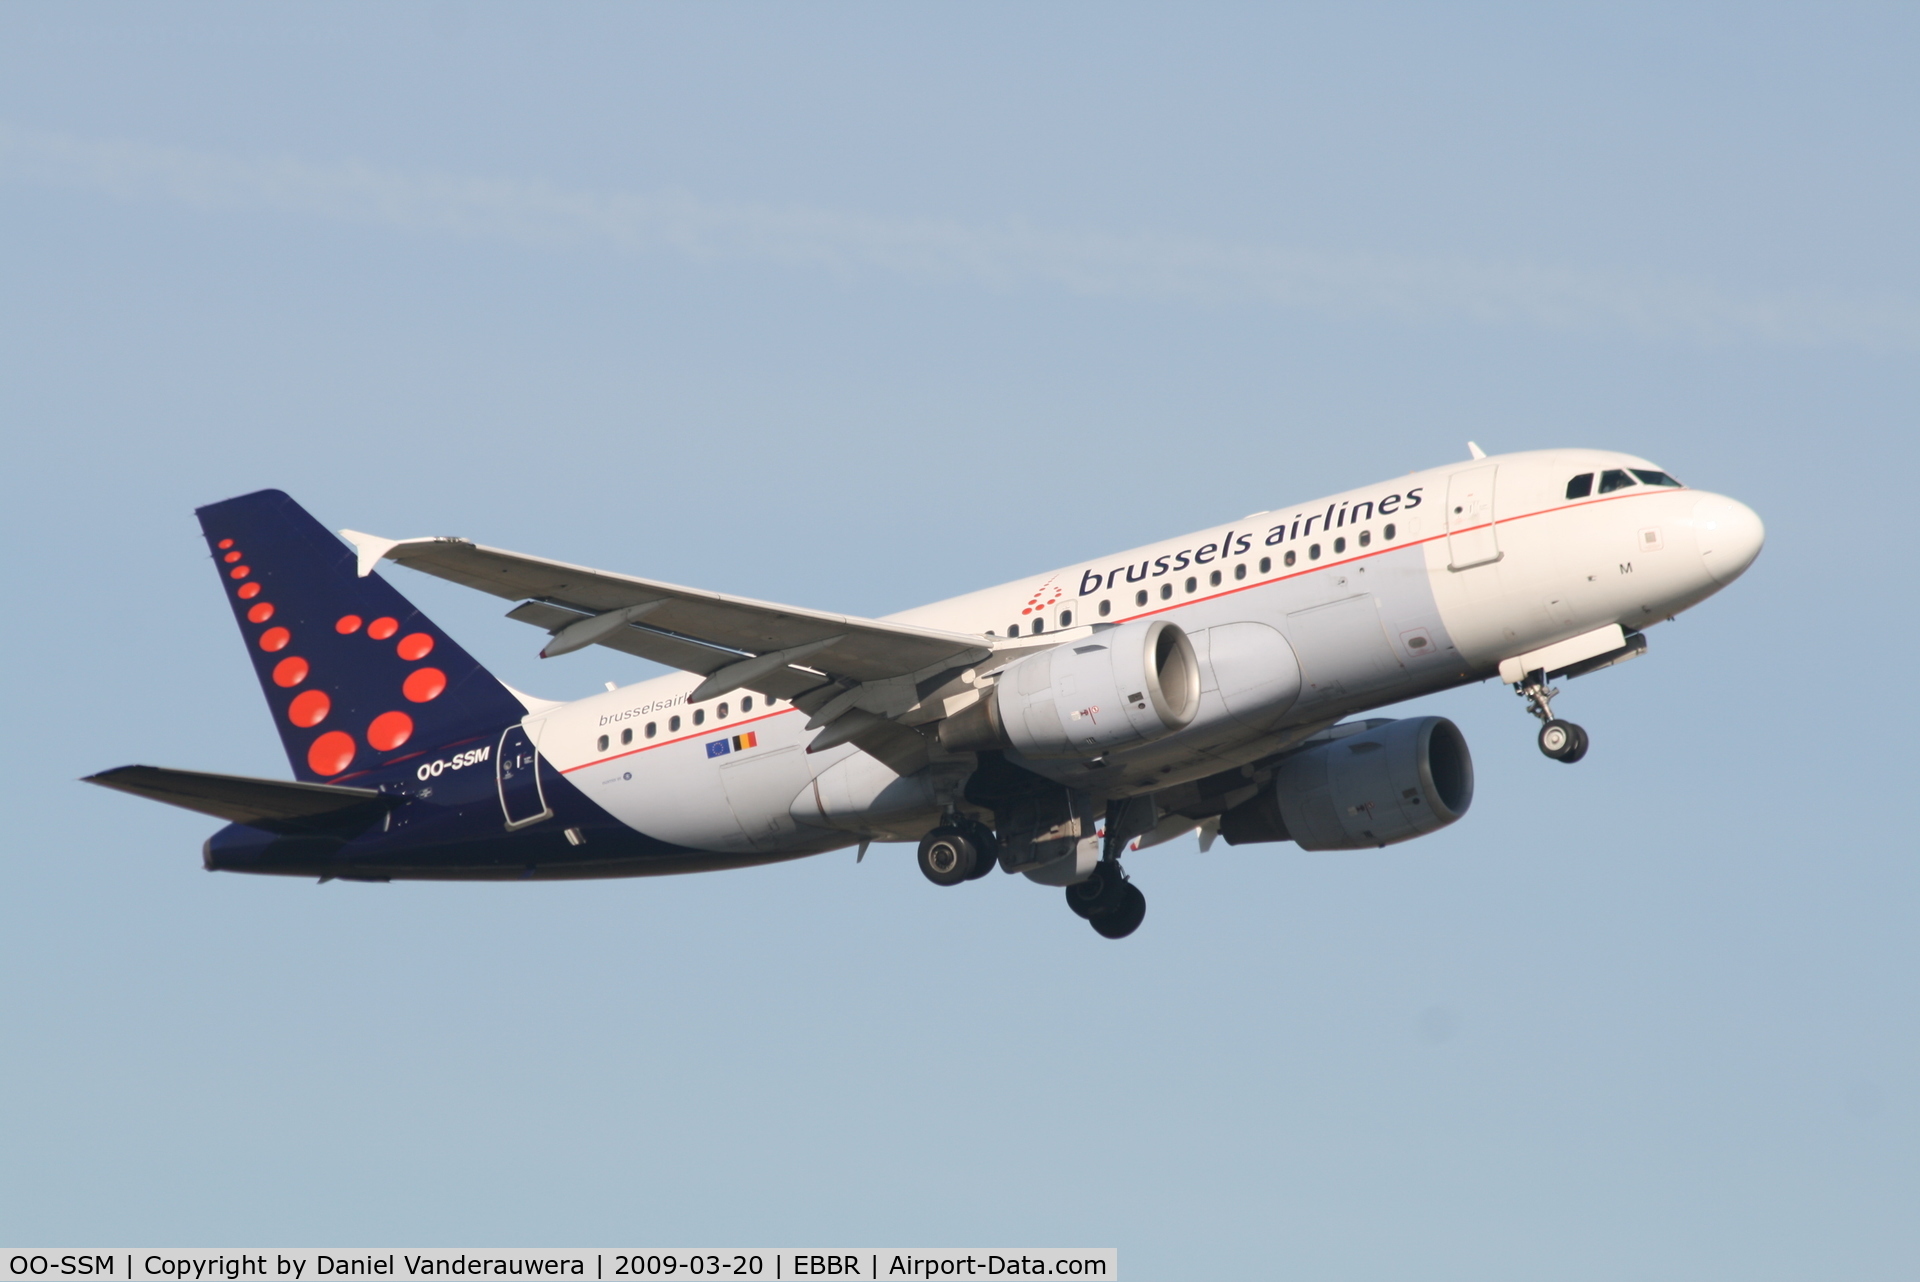 OO-SSM, 2000 Airbus A319-112 C/N 1388, taking off from rwy 07R